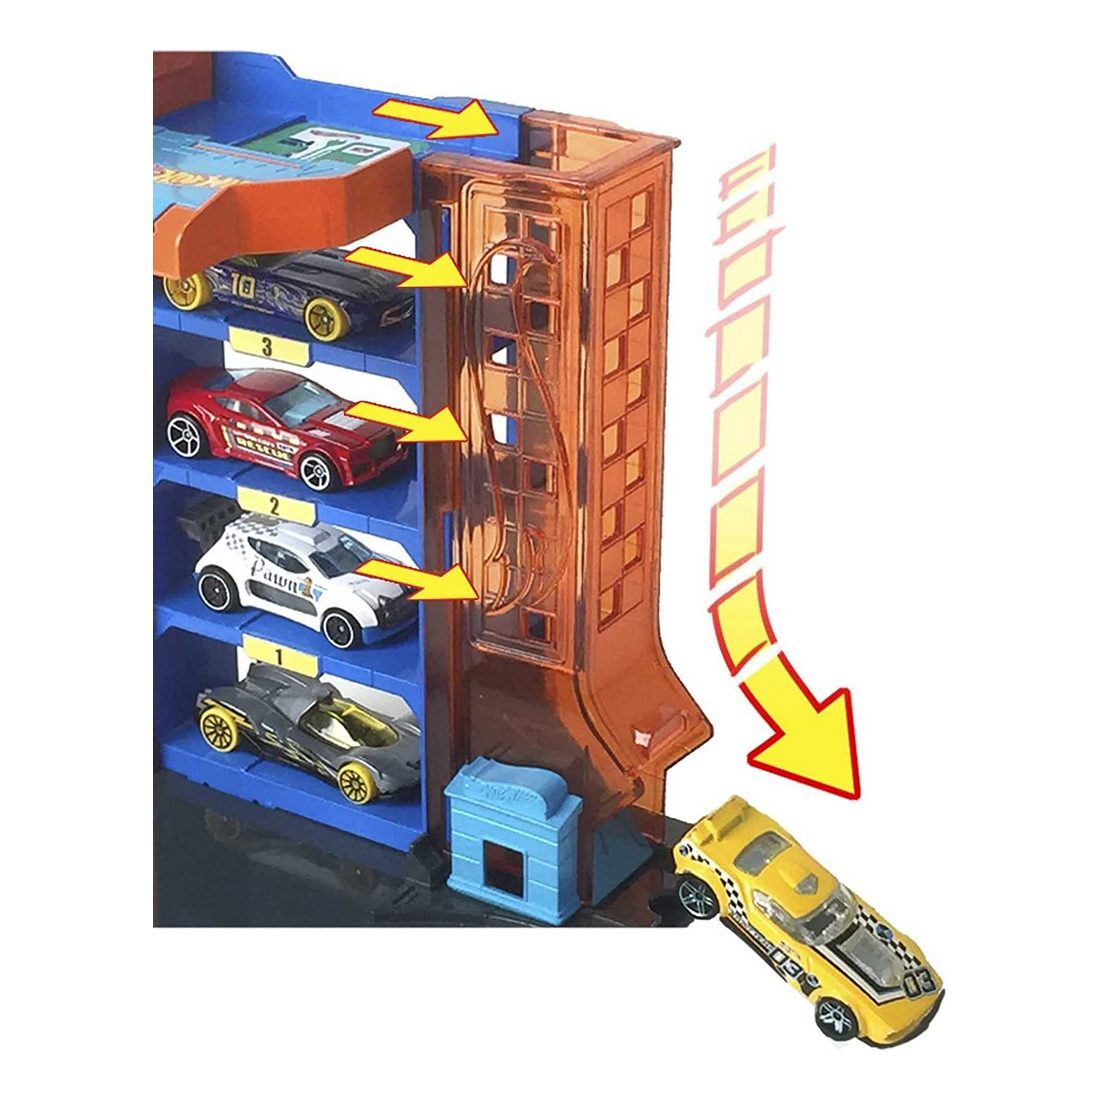  Hot Wheels City Toy Car Track Set Downtown Car Park Playset  with 1:64 Scale Vehicle, 4 Levels, Working Lift & Exit Chute For 4 years  and up, Multi : Toys & Games